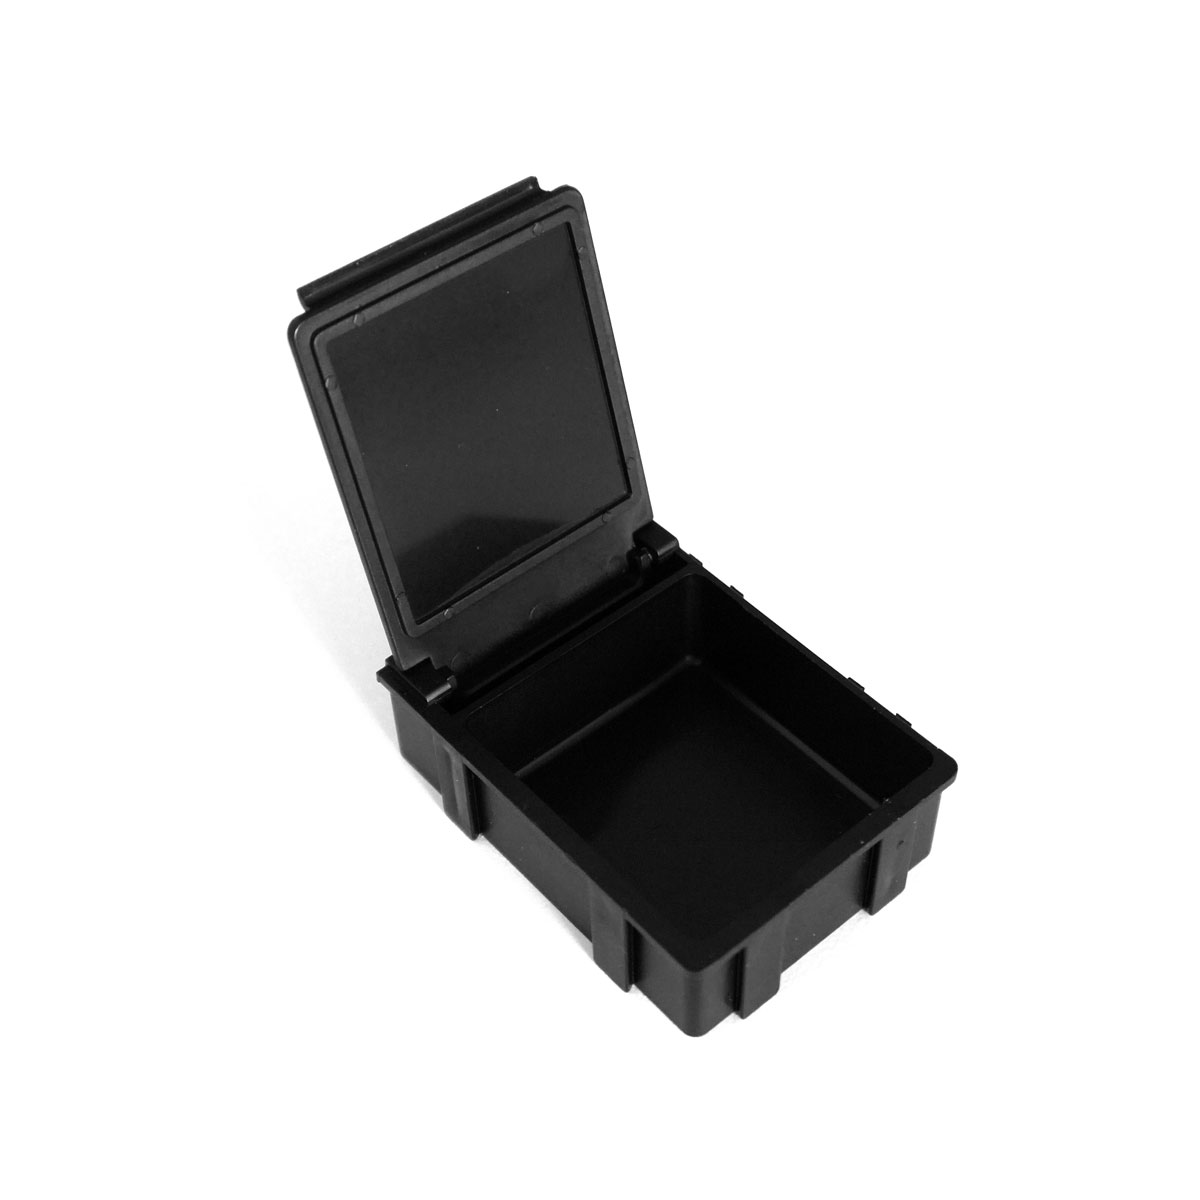 AES-ESD Container Lidded Boxes with Hinged Lid-9-323-10-b00-esd-smd-kleinbehaelter-box